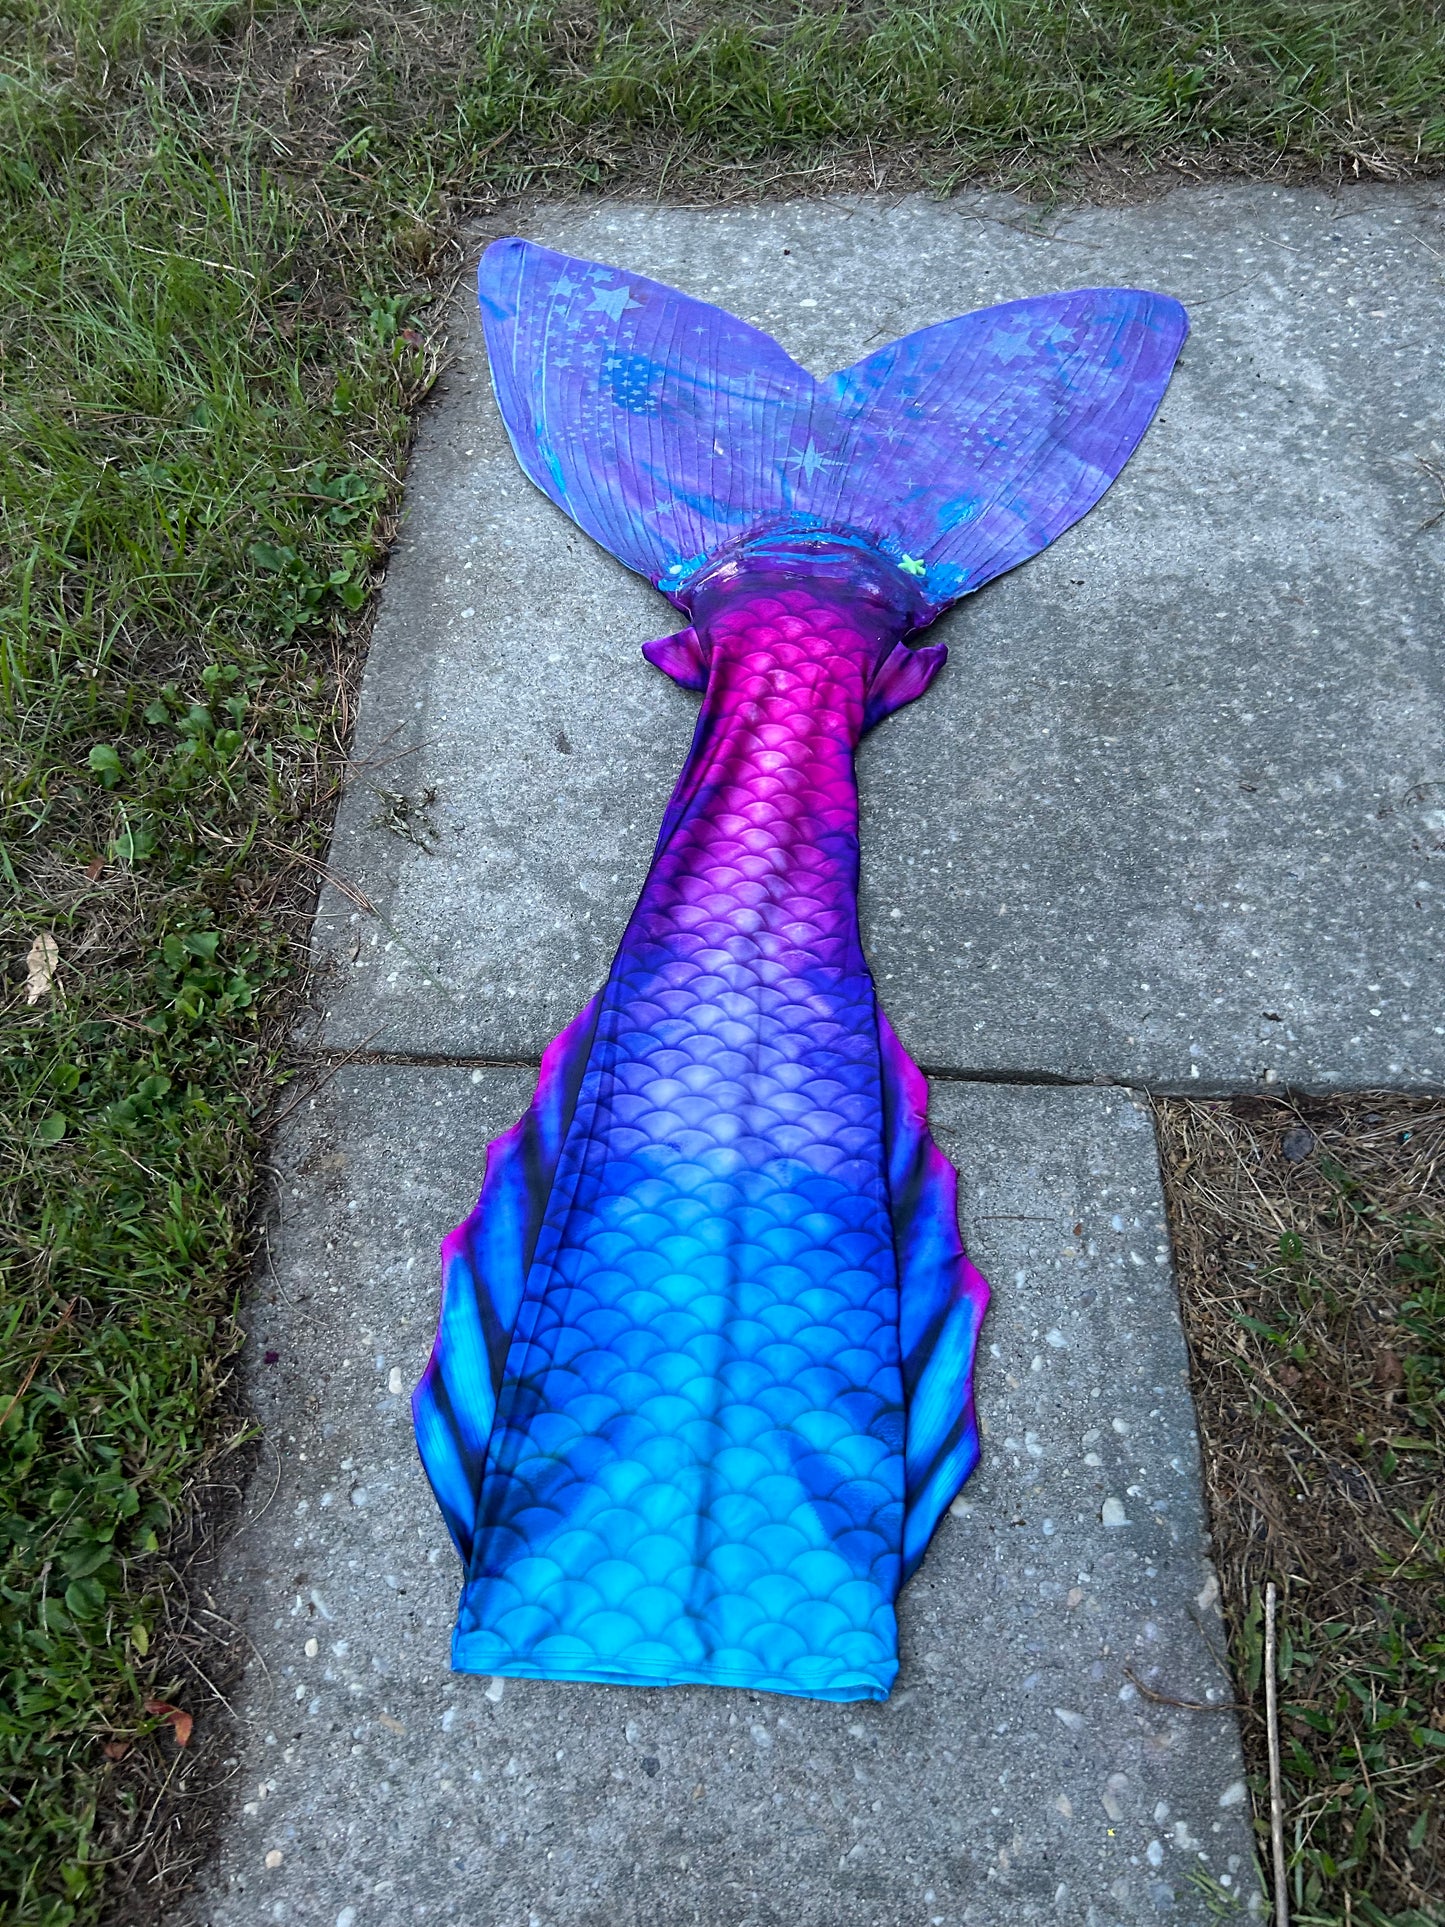 Galaxy glow in the dark Mermaid Tail hybrid tail - barely used personal tail- ready to ship!